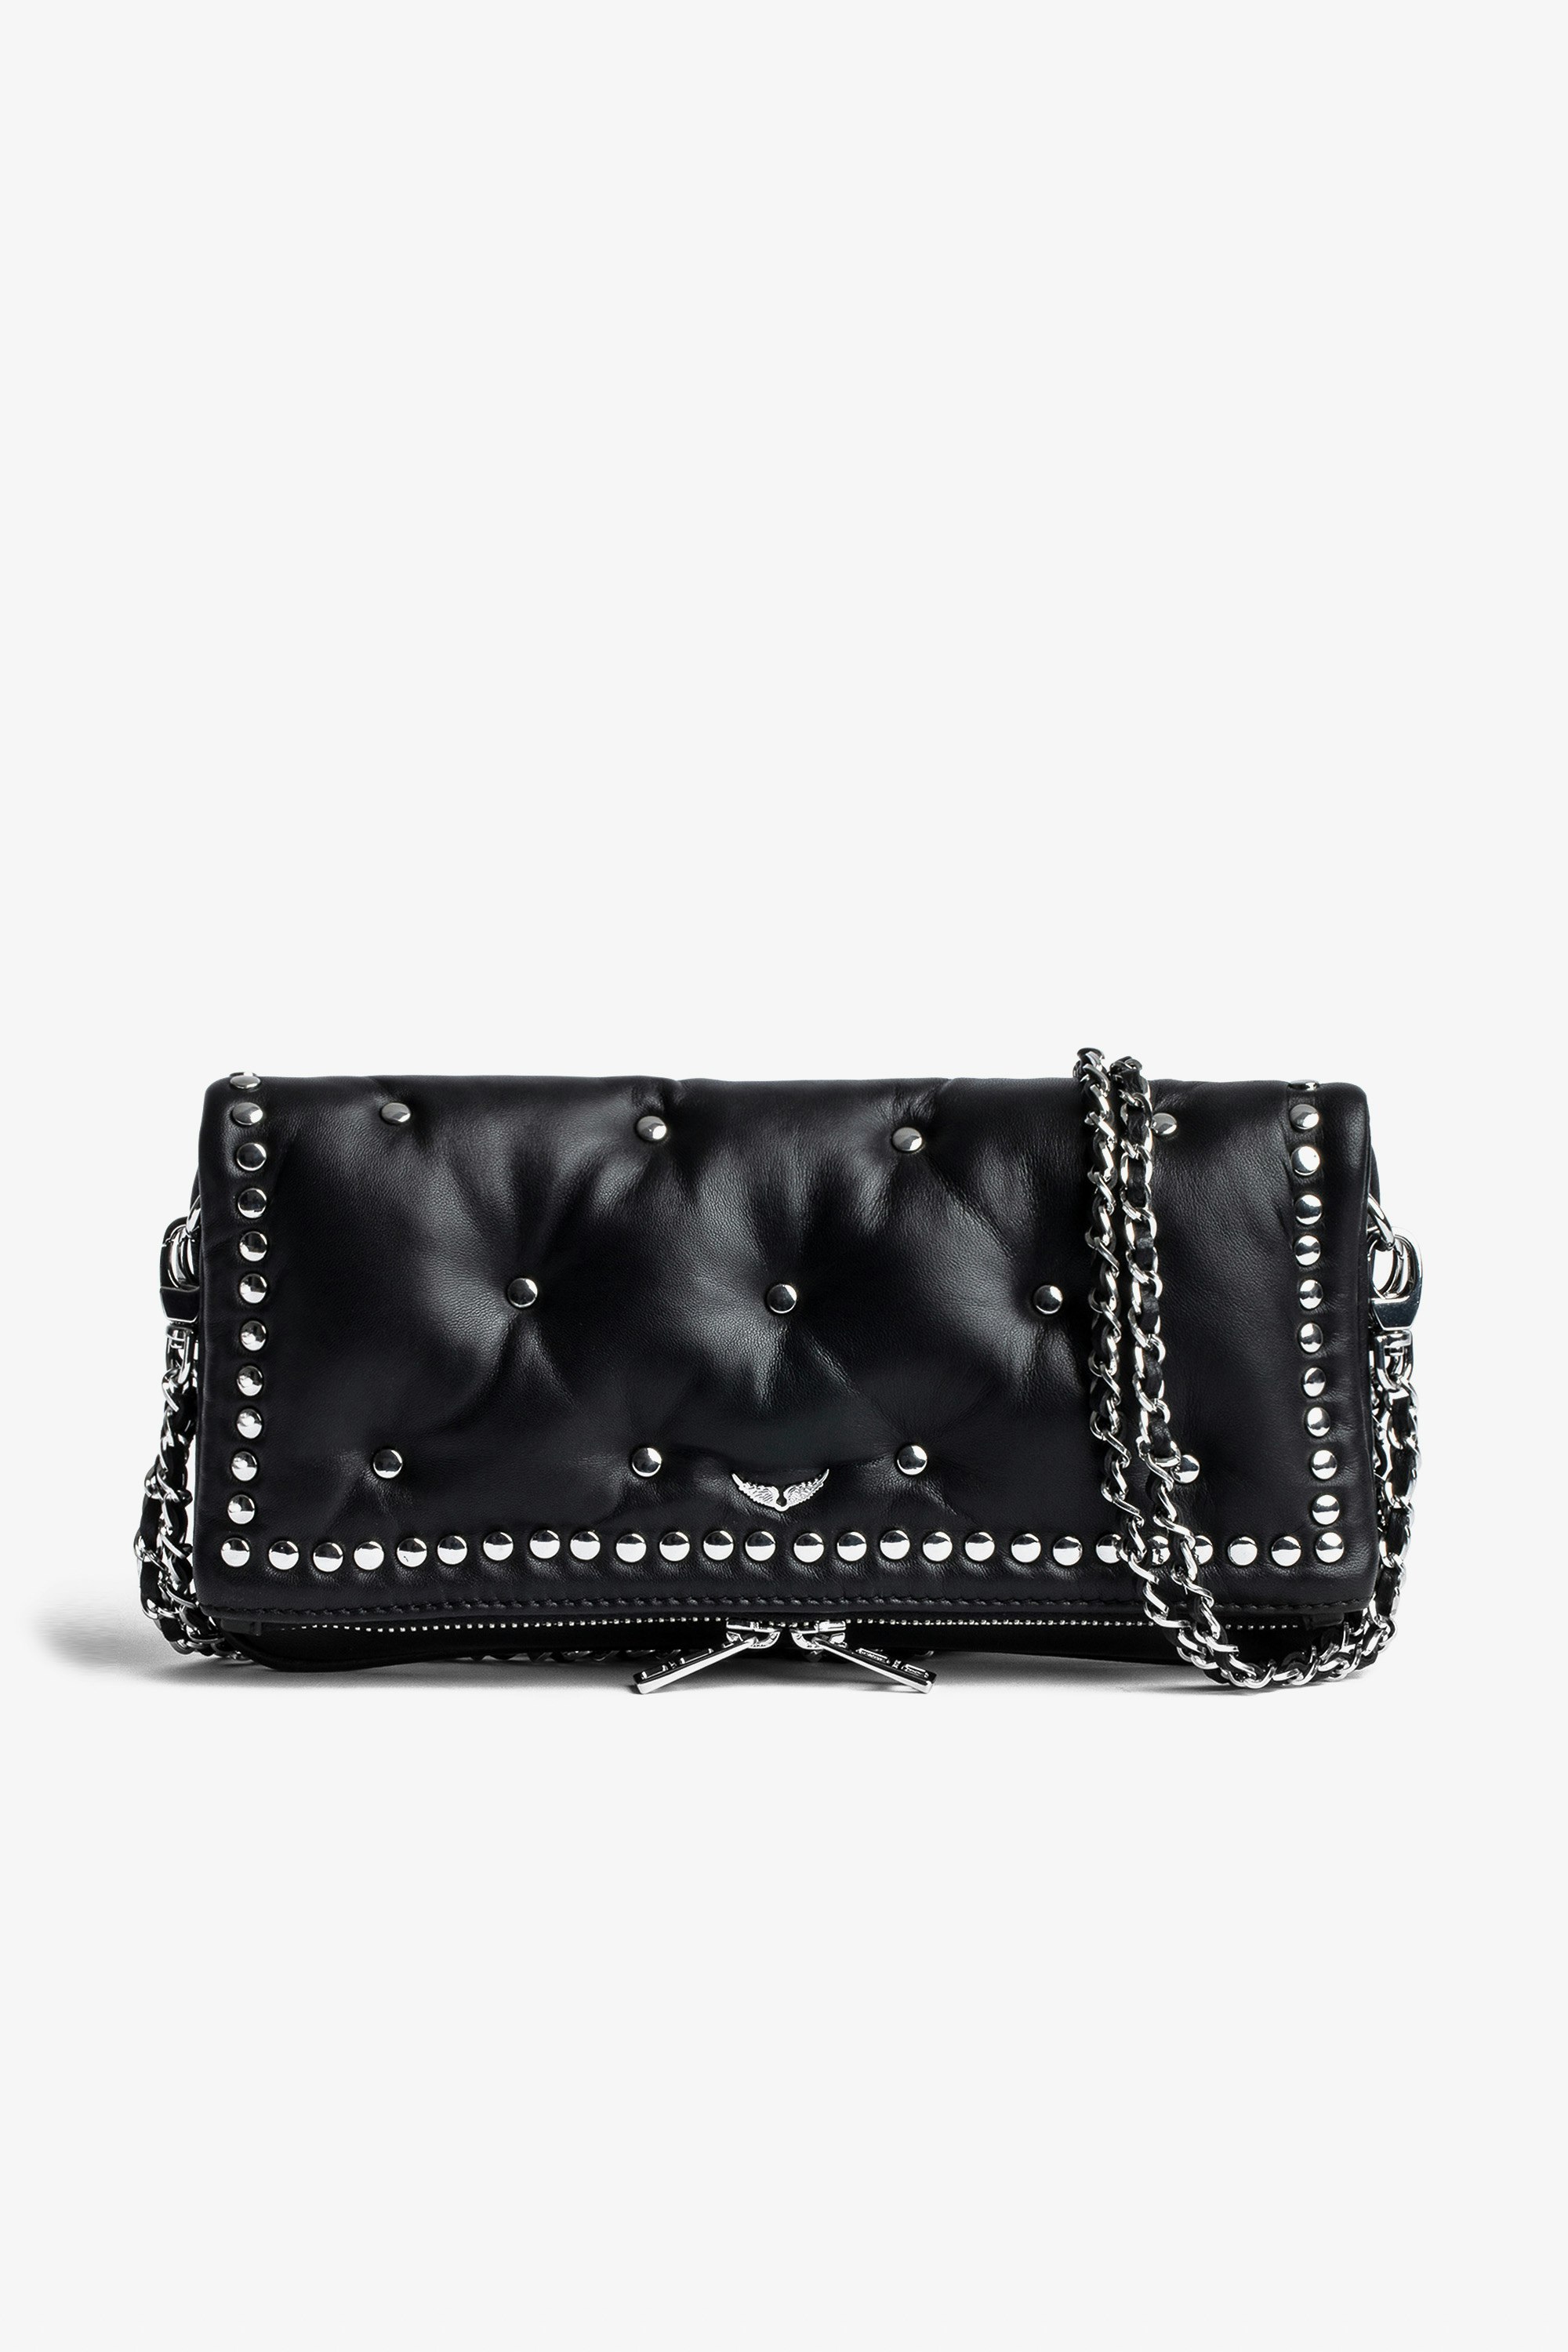 Rock Rider クラッチバッグ Women’s black leather clutch with studs, a leather shoulder strap and chain